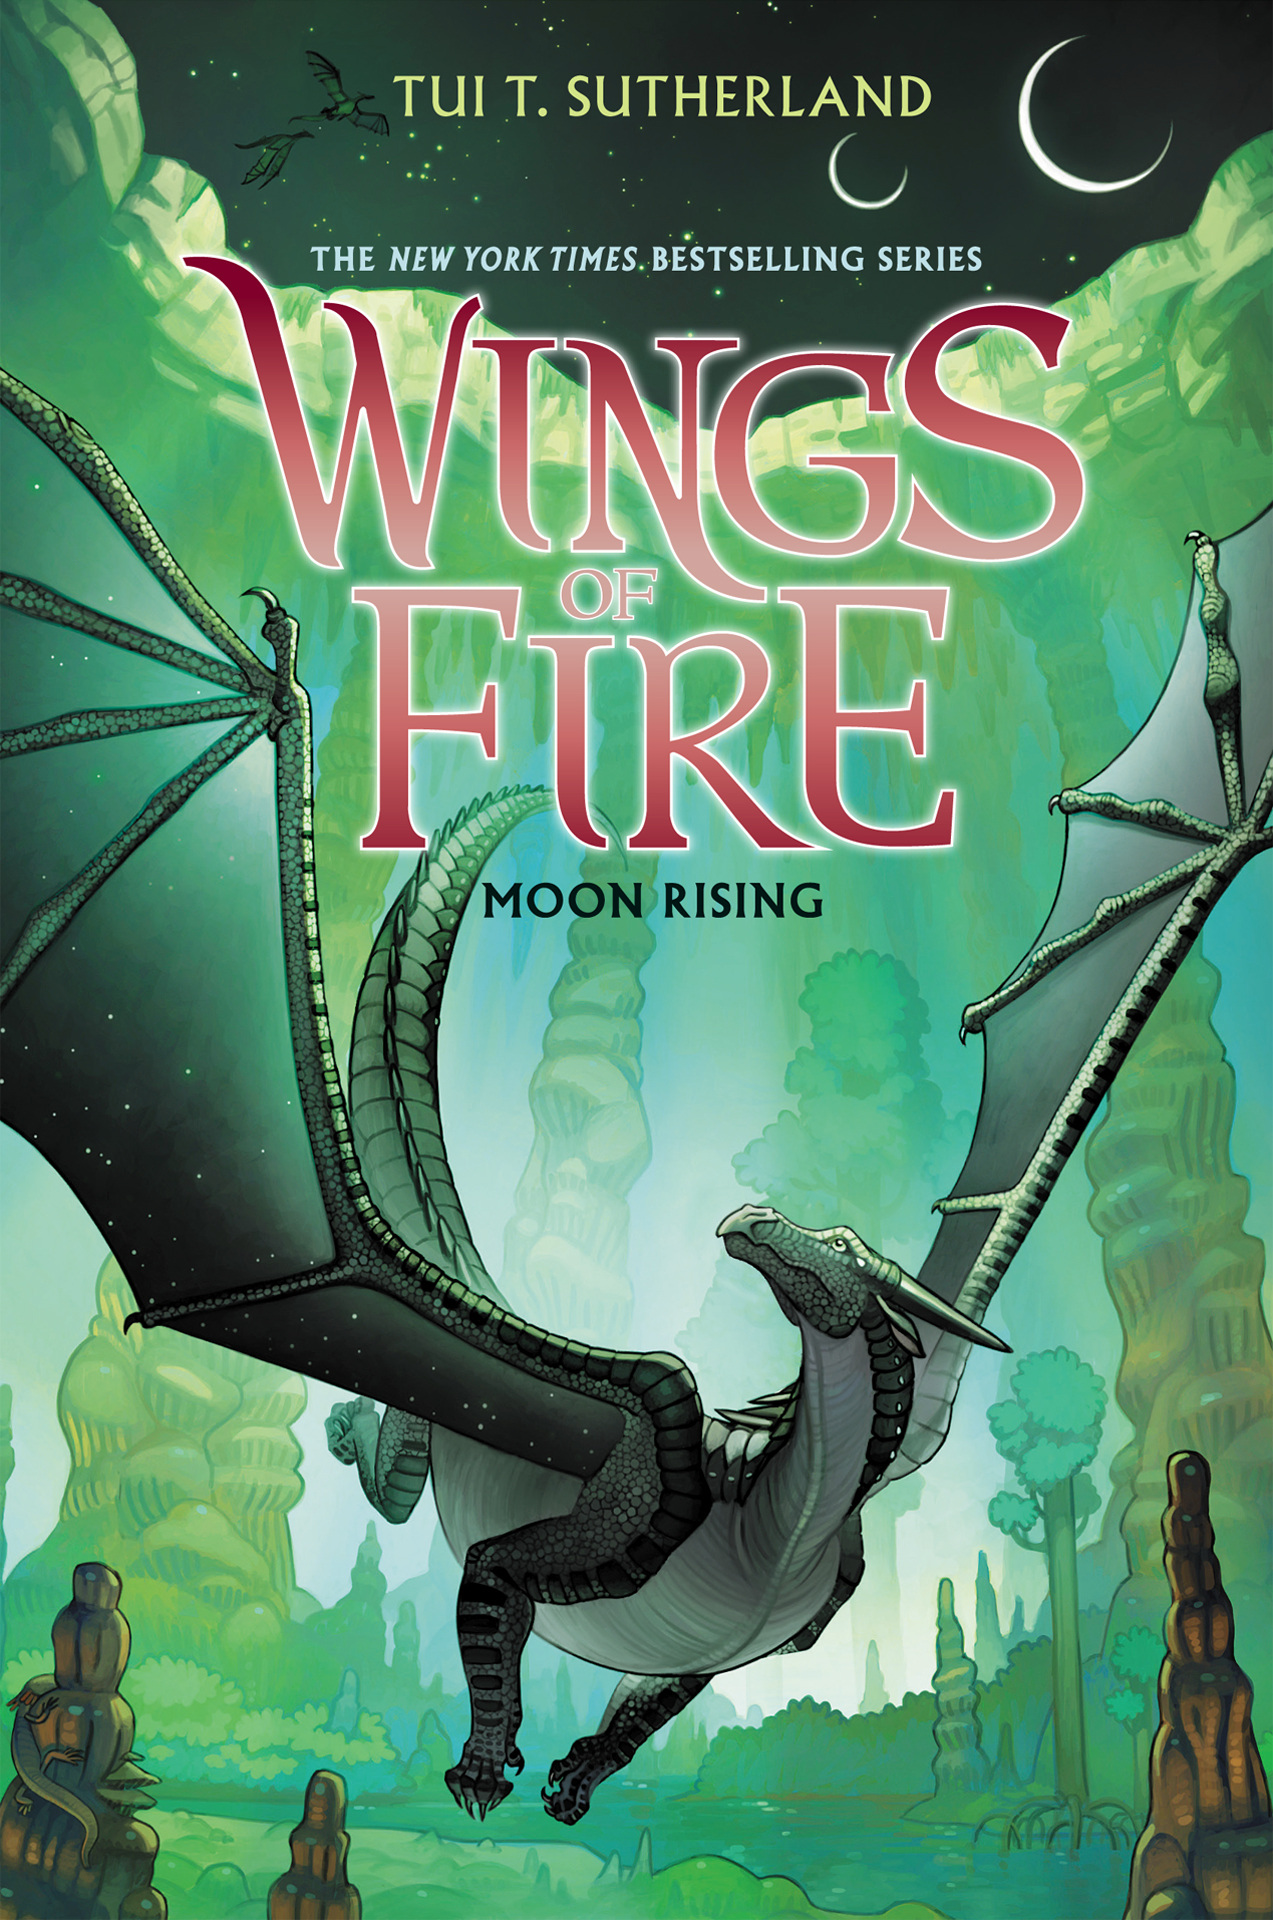 book review of wings of fire in short